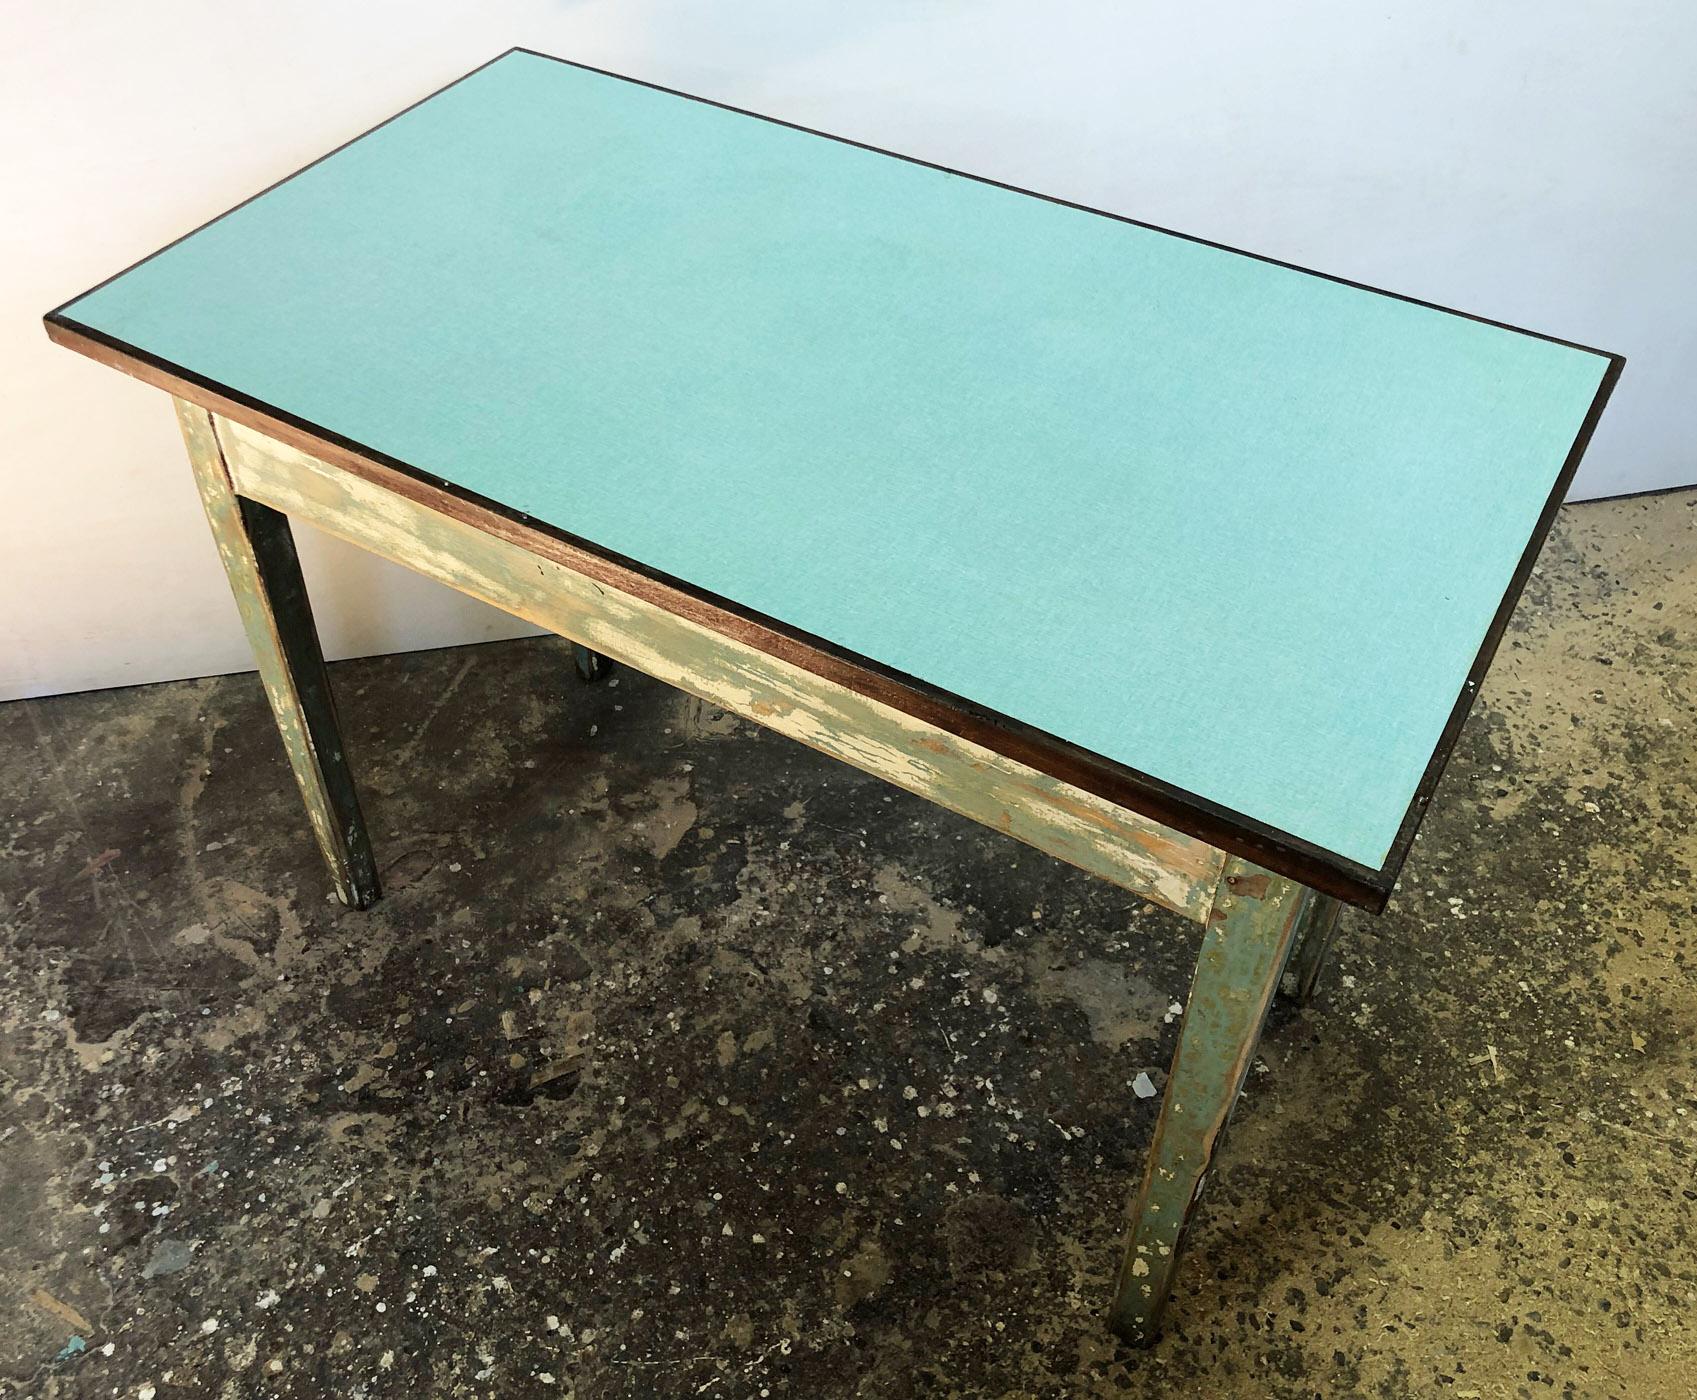 Table from 1950 original Tuscan green white shaded, with top in formica on fir, base in walnut and fir. 
Rare color, ideal as a desk or console table.
Base Shellac and wax finish.
Comes from an old country house in the Lucca area of Tuscany.
As